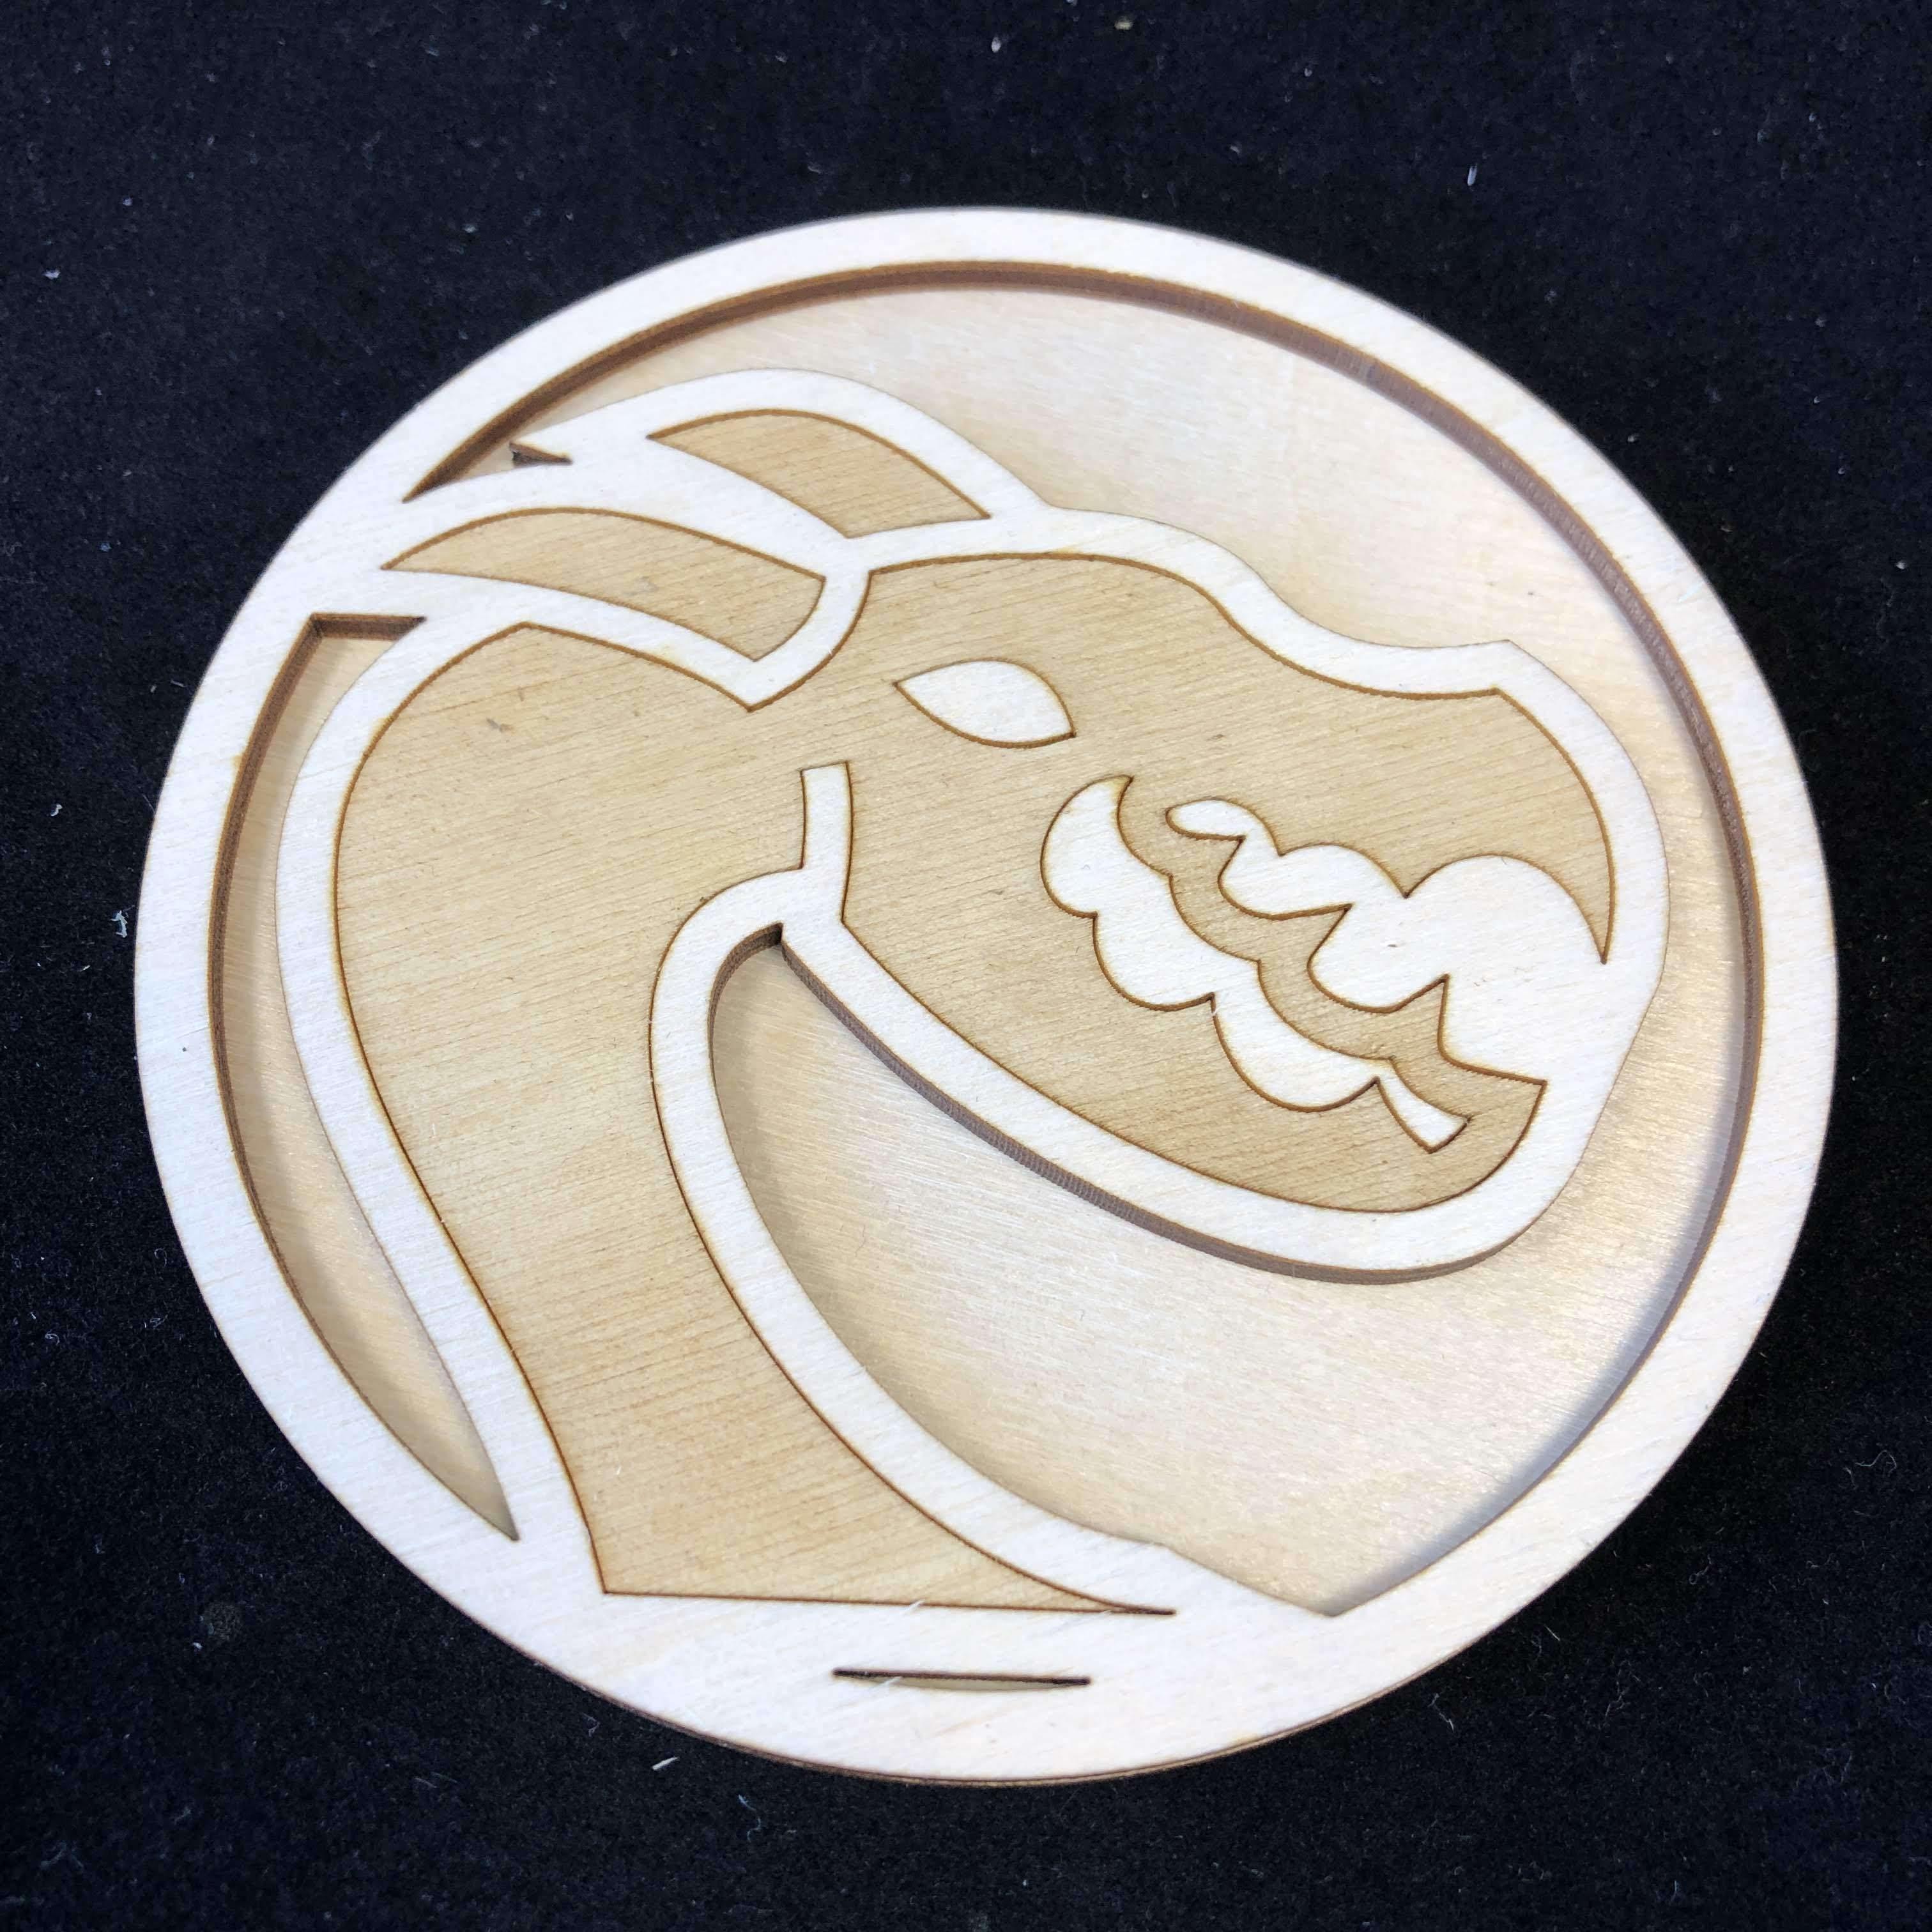 Red Berry Crafts Ltd:Deluxe 4 Inch Ancient Dragon 2 Gaming Tokens